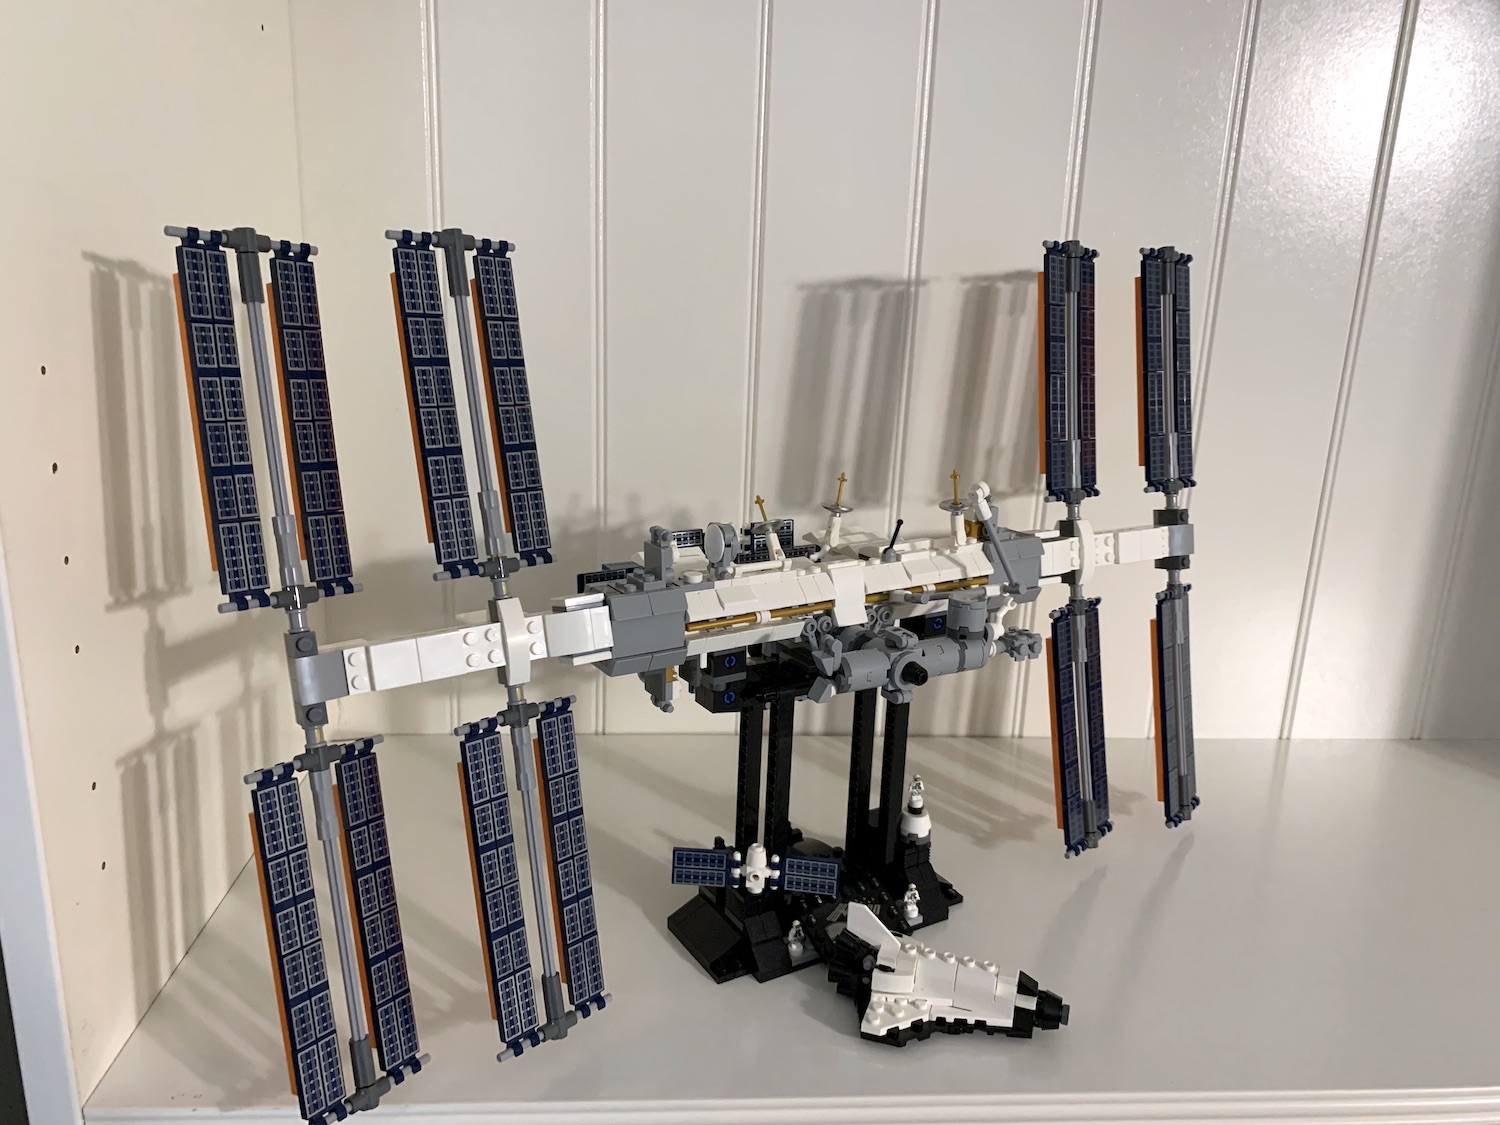 LEGO ISS